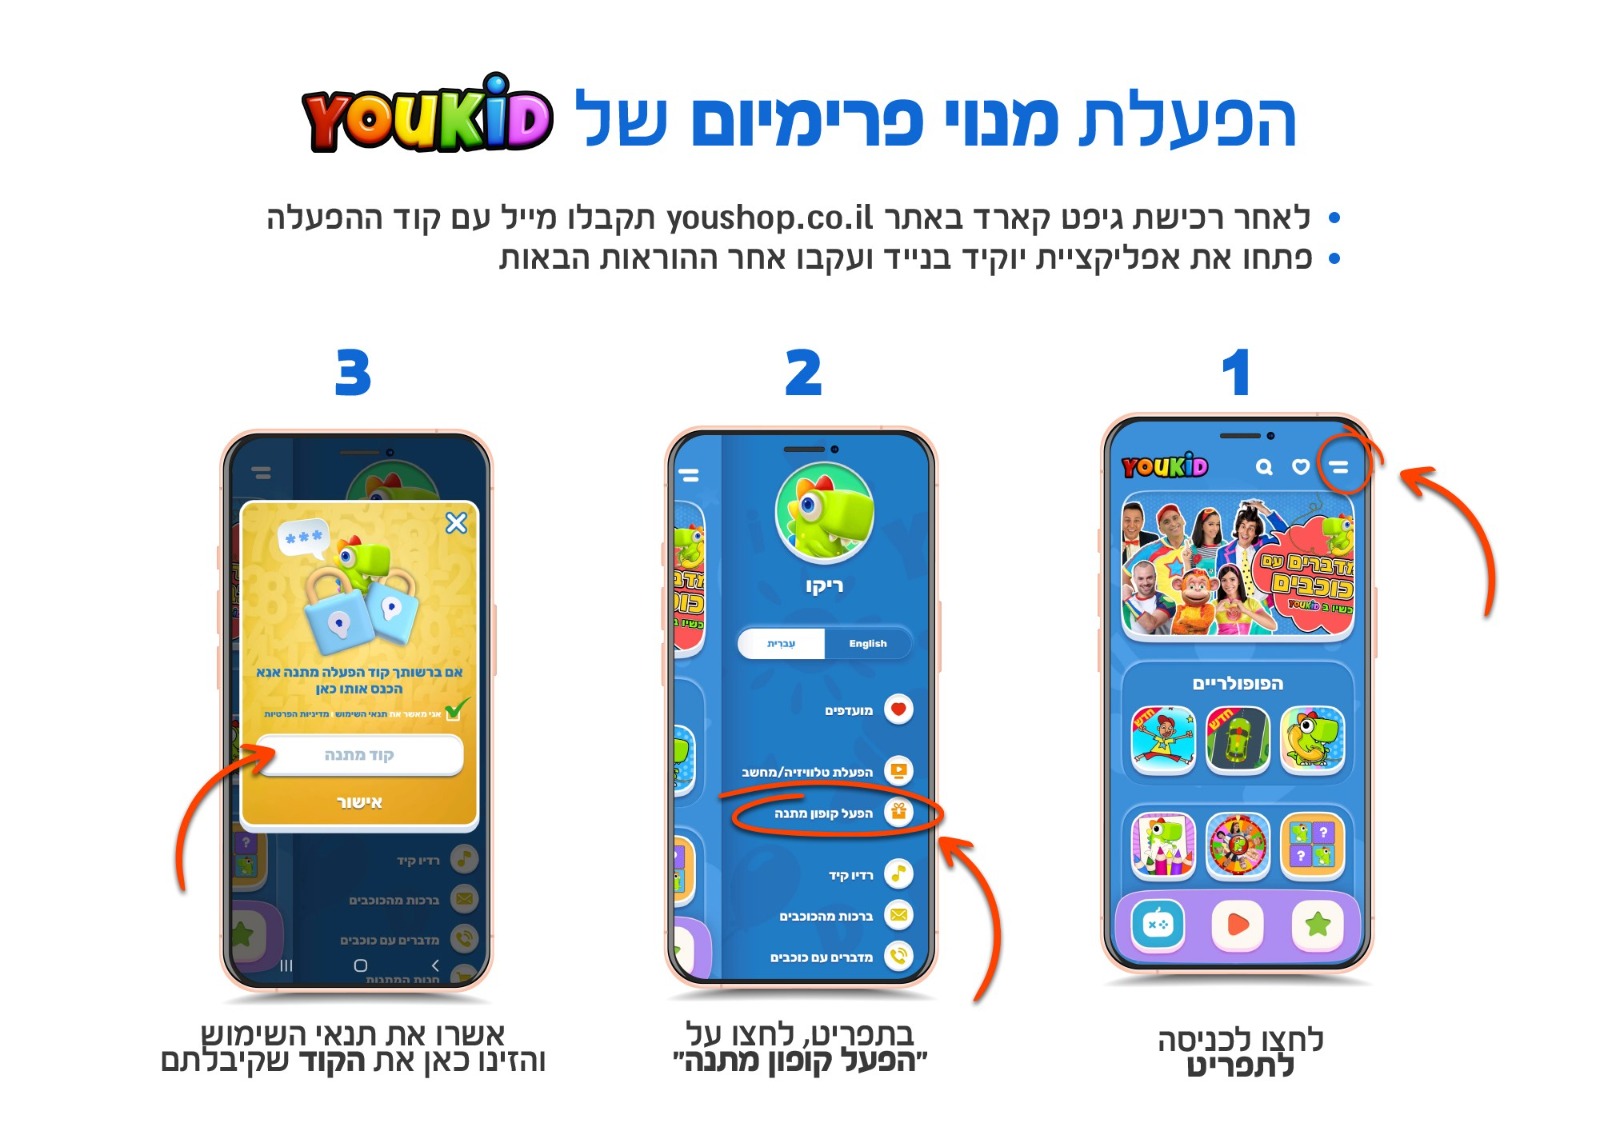 Youkid TV activation